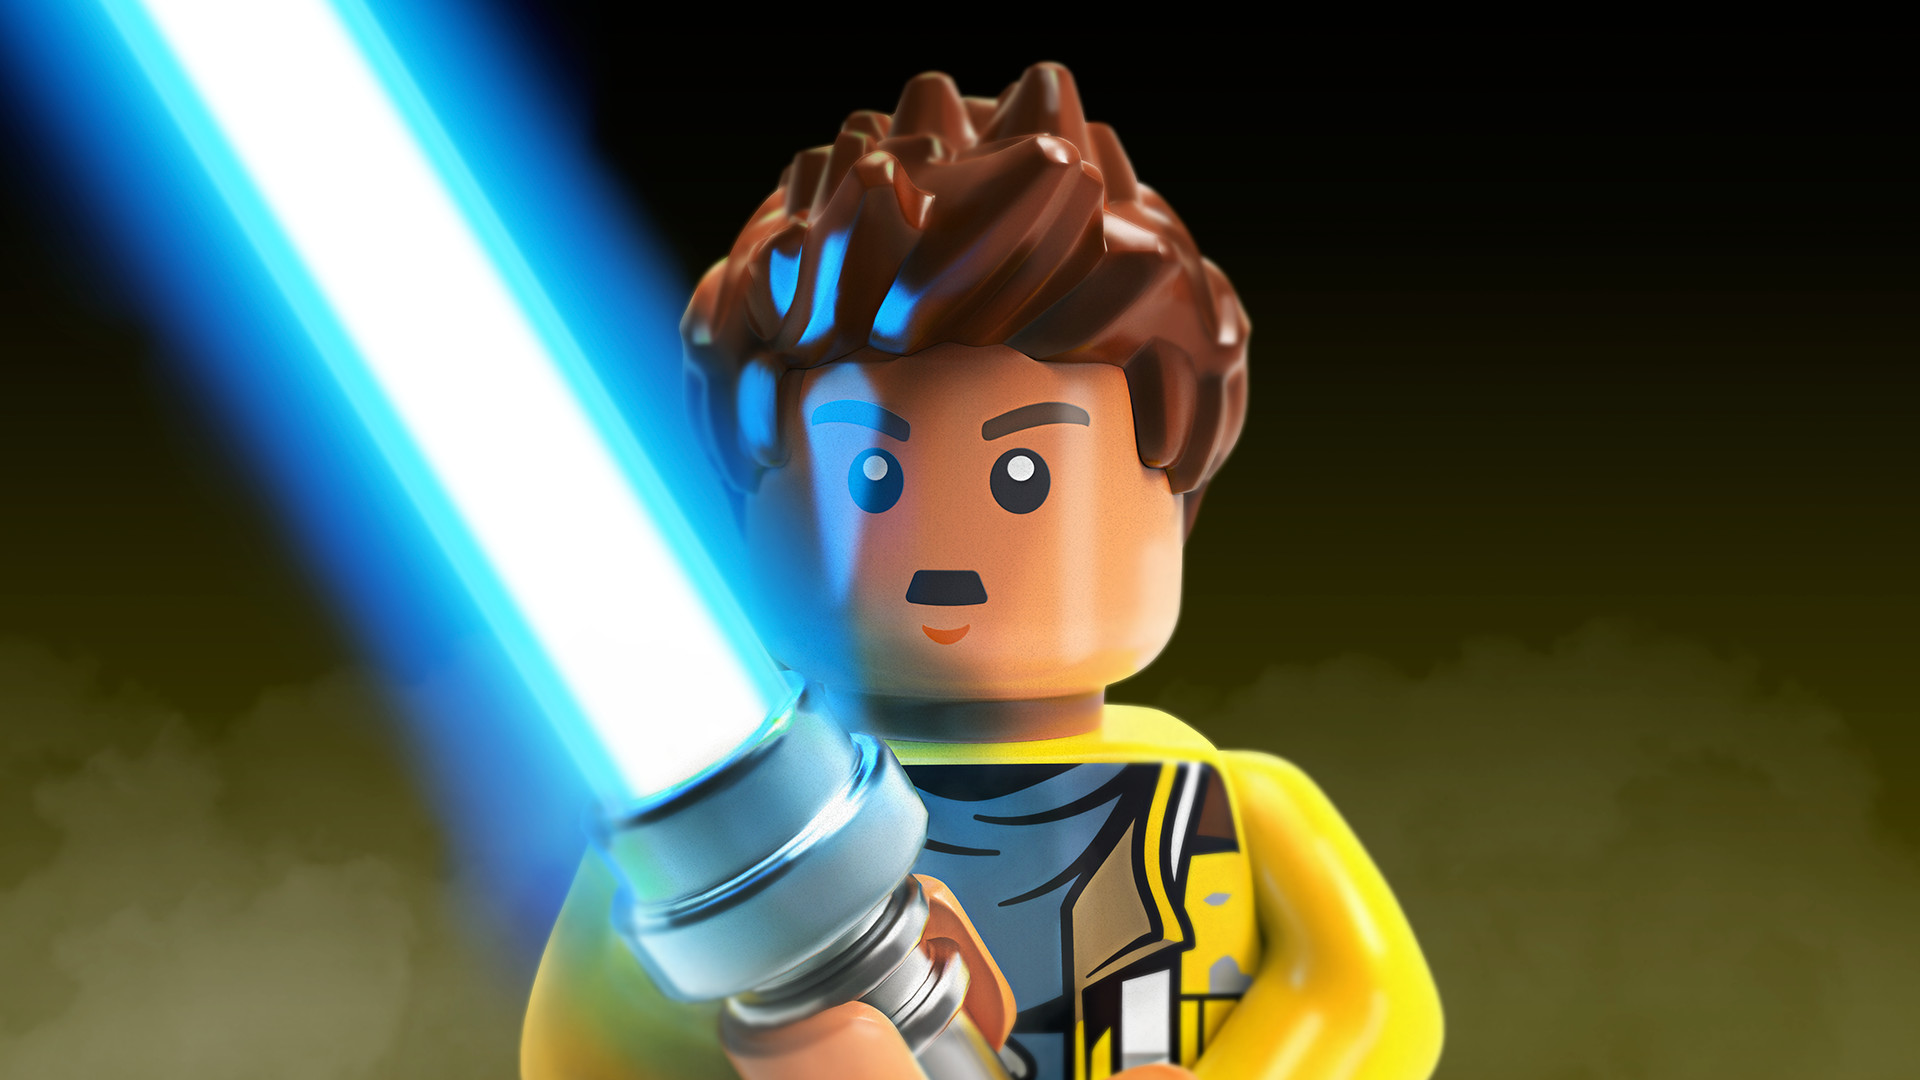 [$ 1.68] LEGO Star Wars: The Force Awakens - The Freemaker Adventures Character Pack DLC Steam CD Key